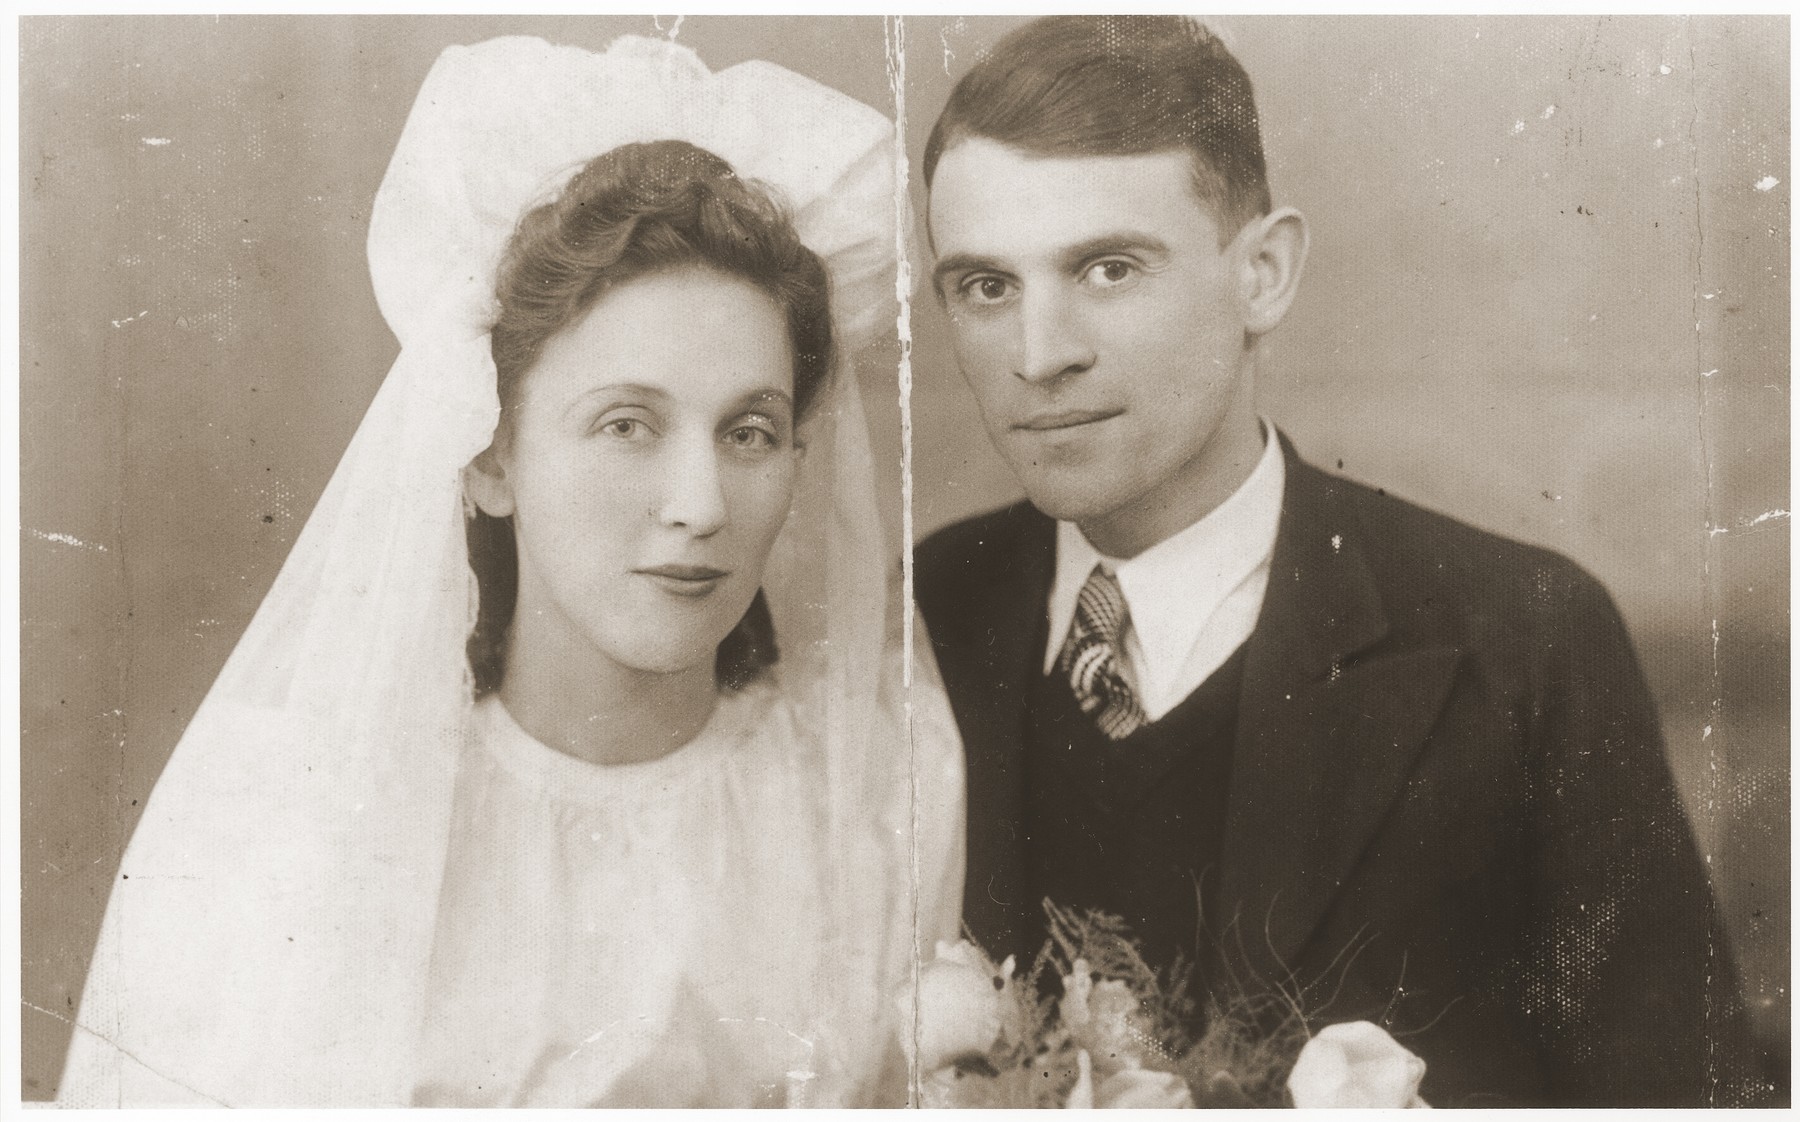 Wedding portrait of Gucia Brzeziner and Mendel-Ajzik Kleiner taken in the Lazy ghetto two years before they were killed at Auschwitz.